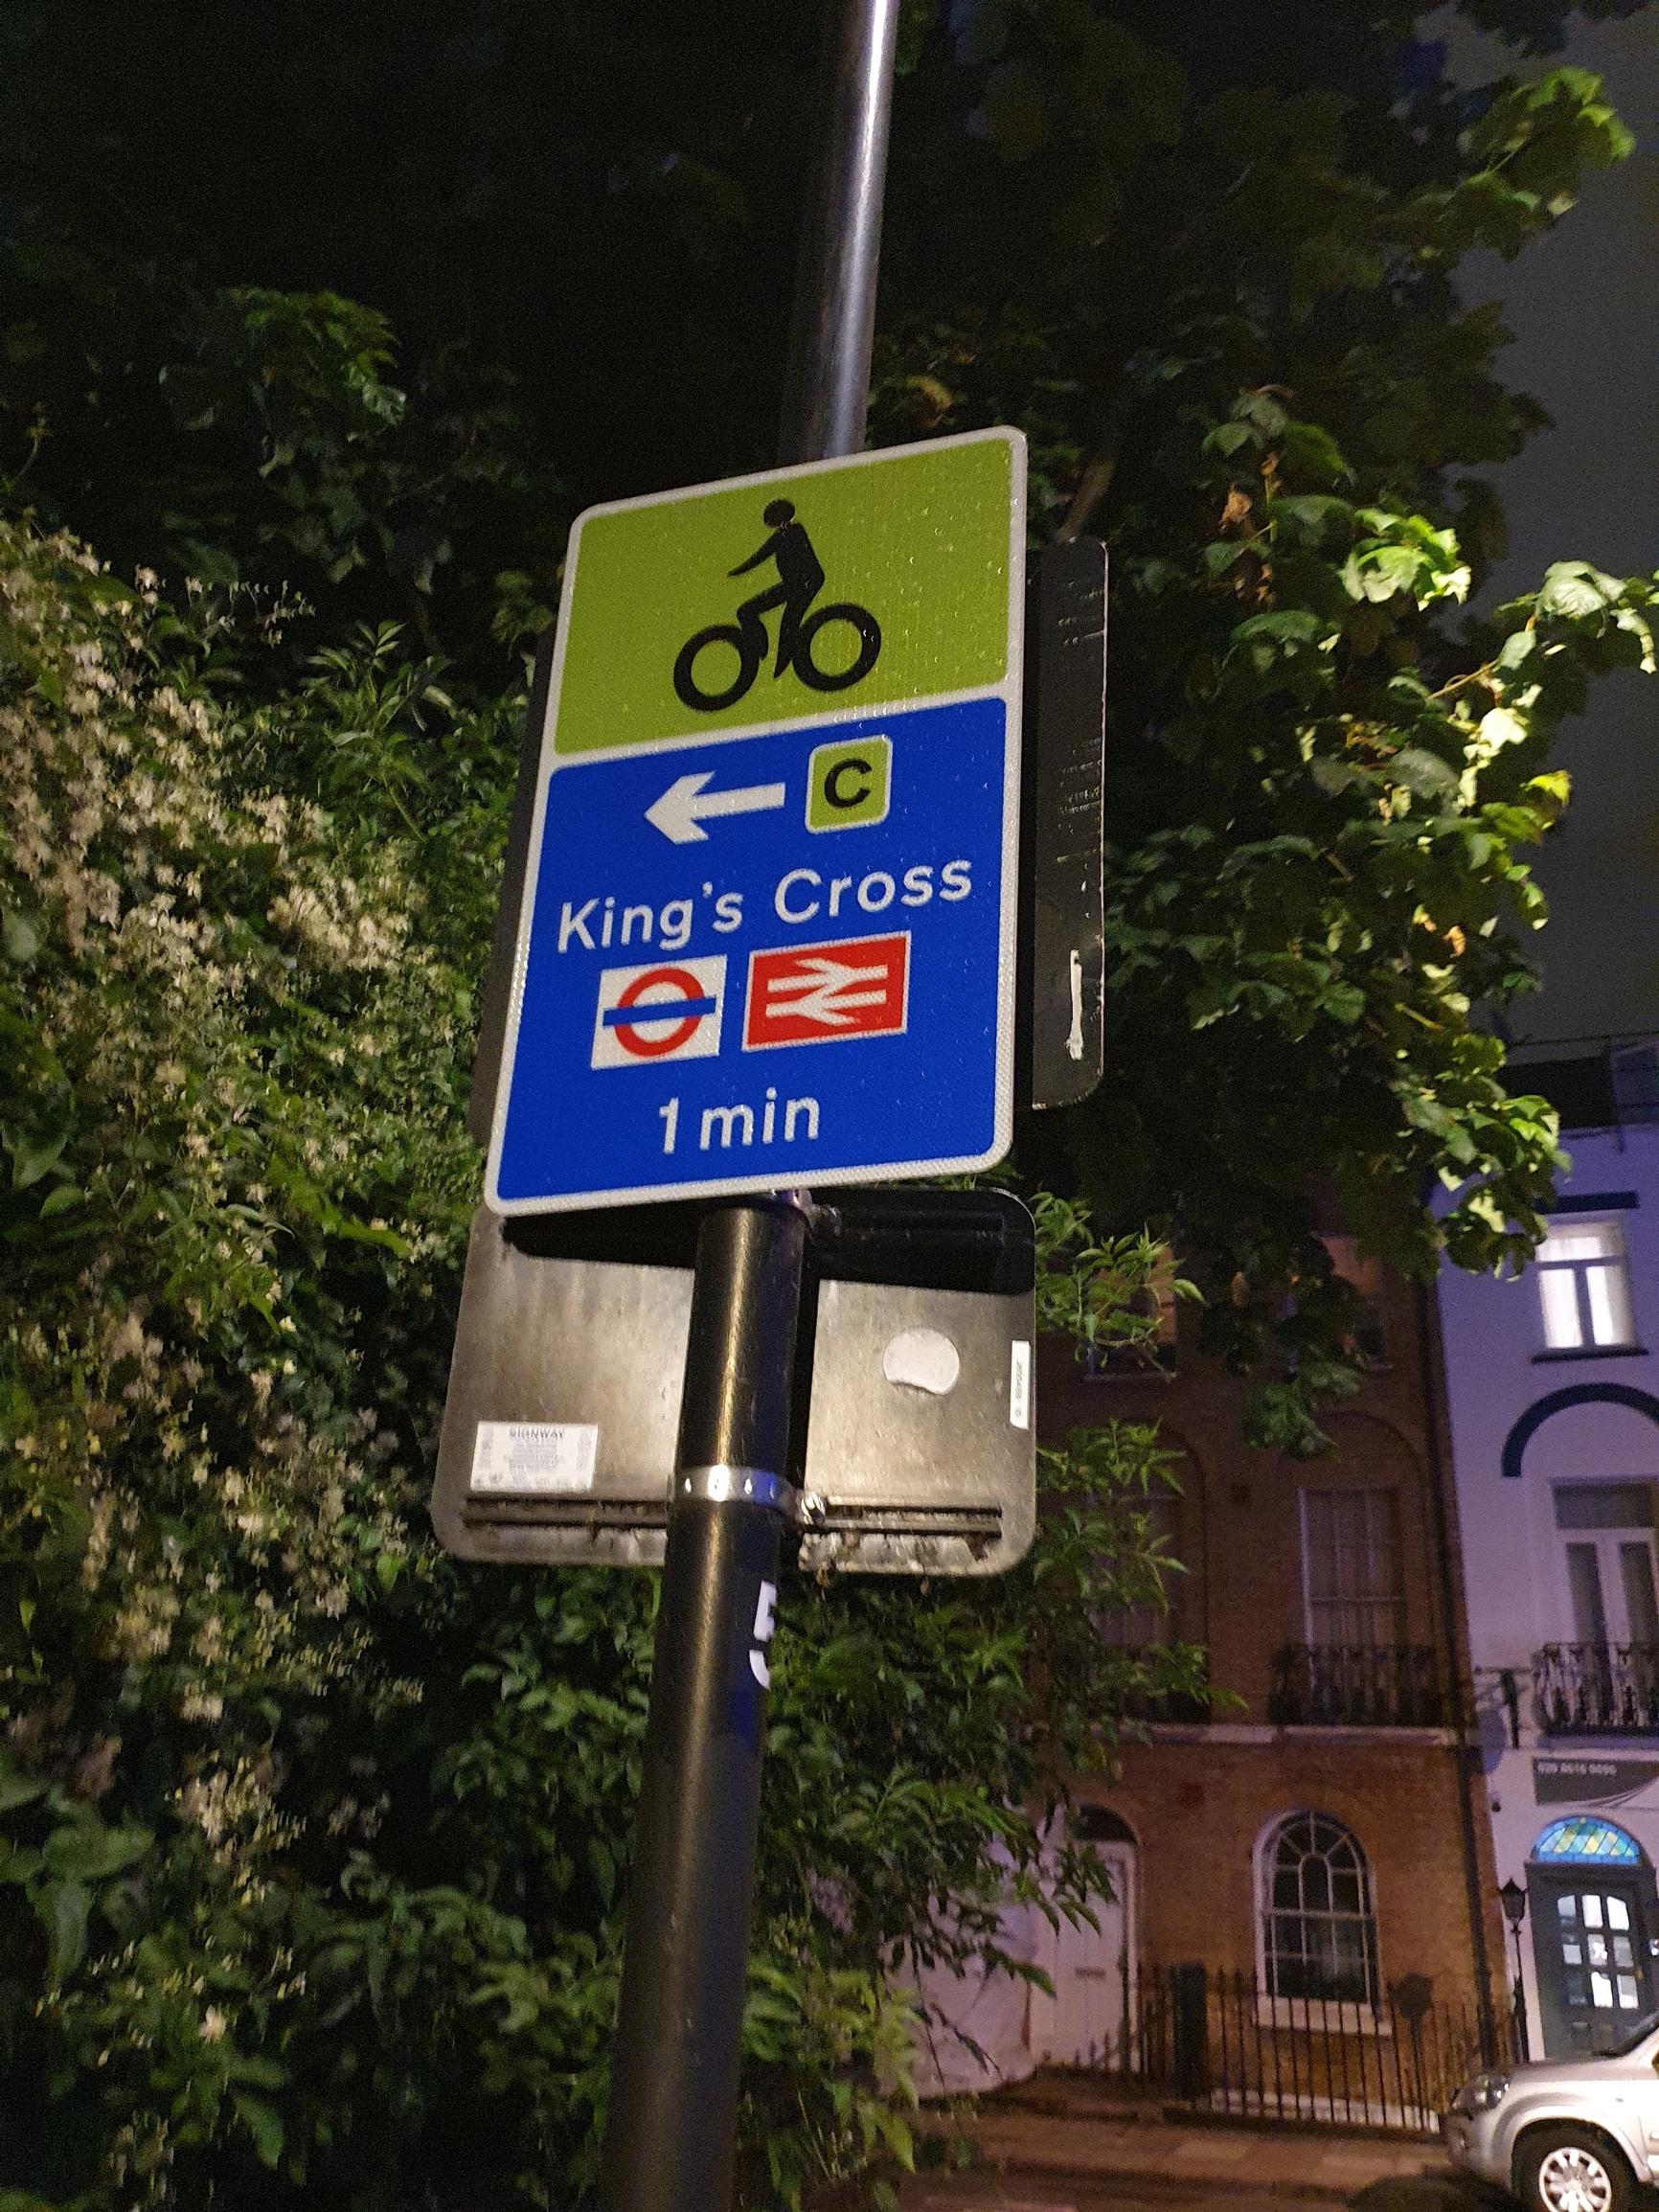 The value of wayfinding in enhancing active travel networks